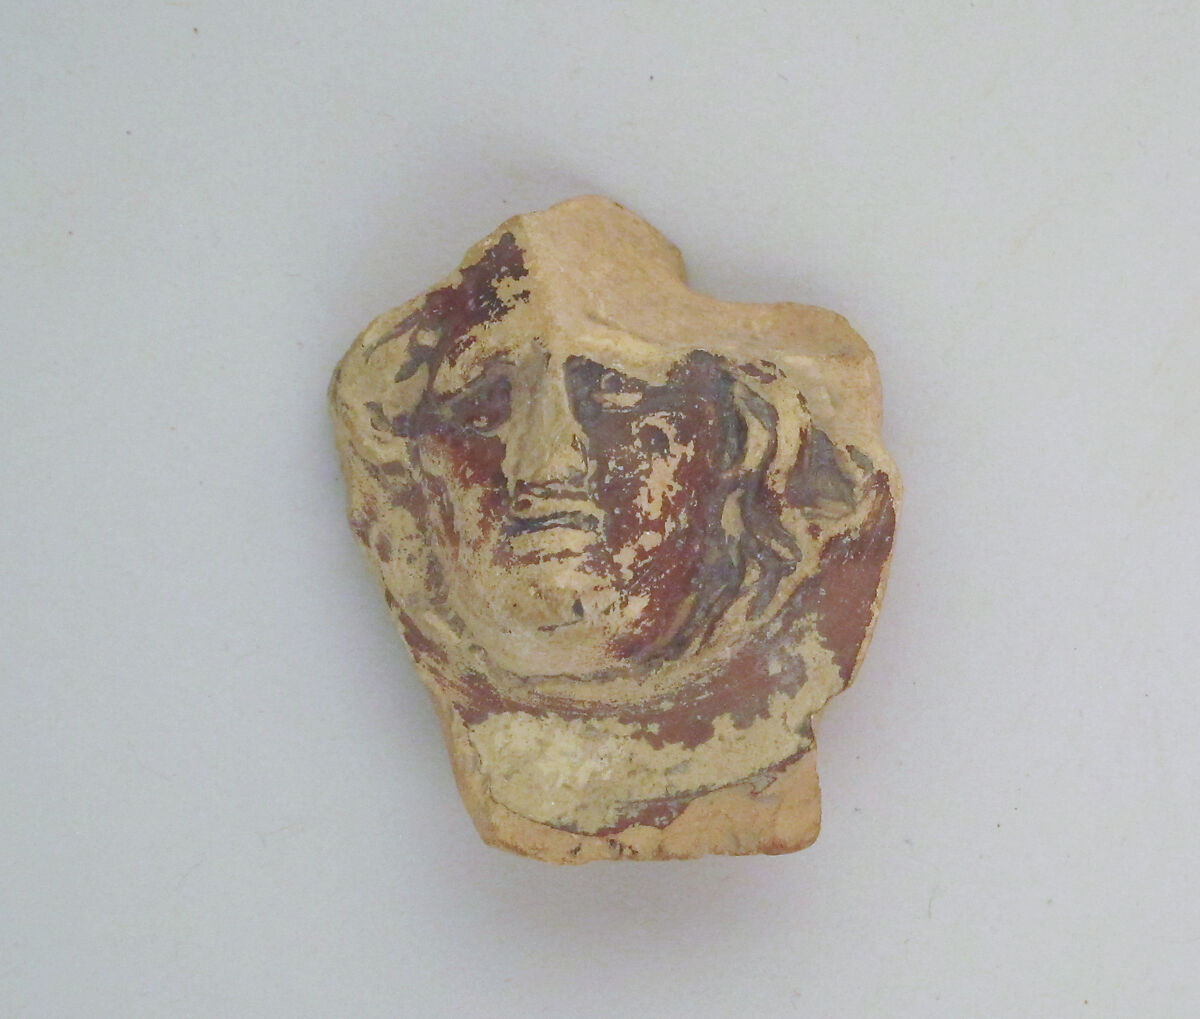 Vase fragment in the form of a face, Terracotta 